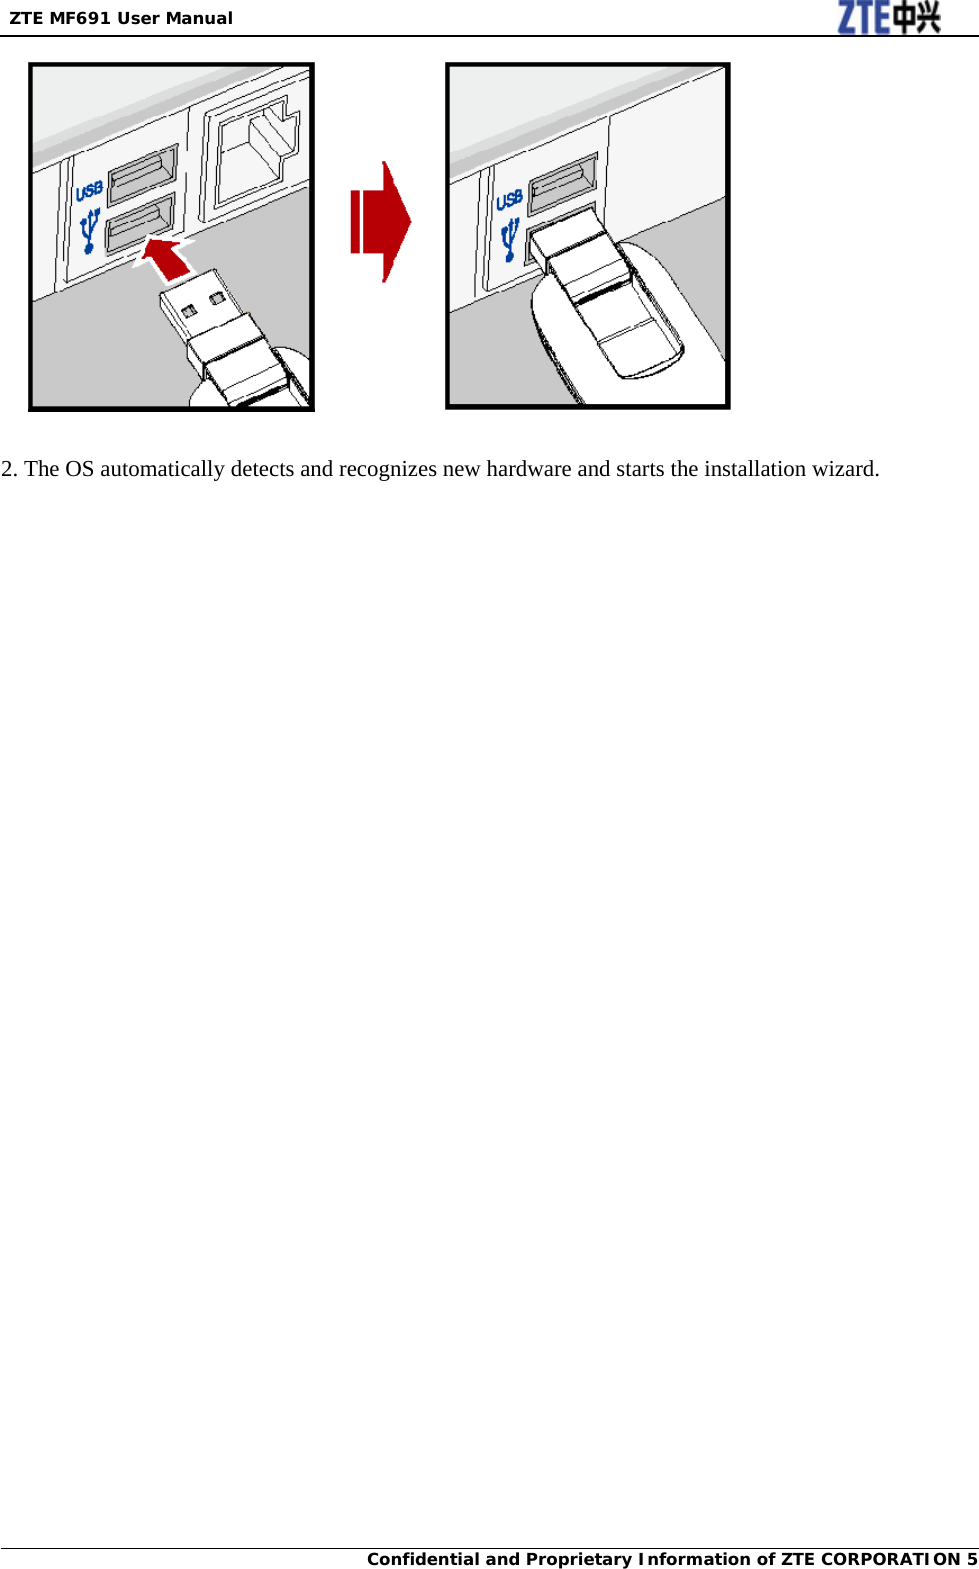  ZTE MF691 User Manual Confidential and Proprietary Information of ZTE CORPORATION 5   2. The OS automatically detects and recognizes new hardware and starts the installation wizard.   